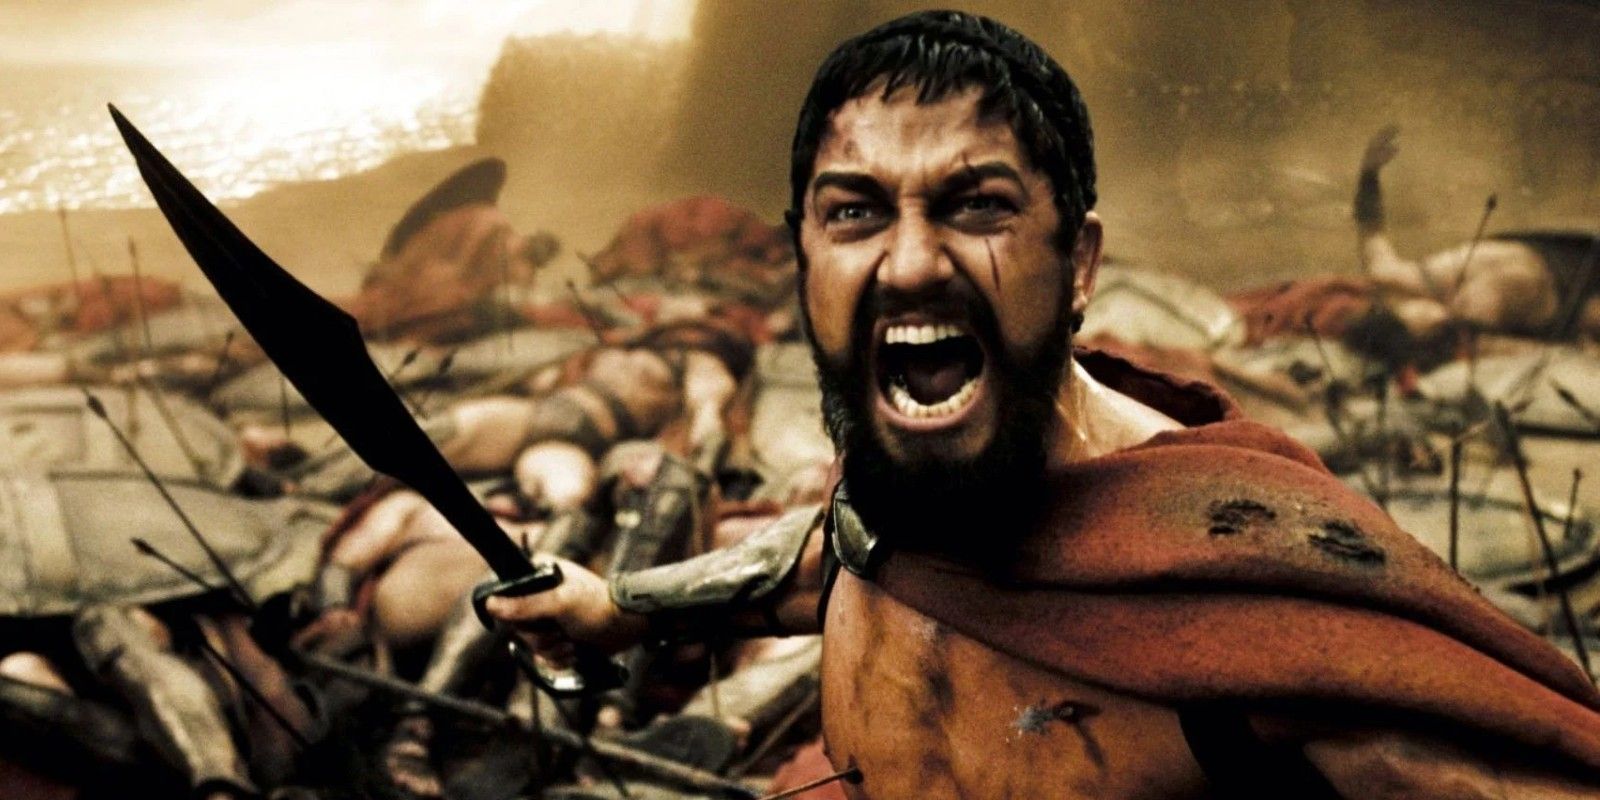 Gerard Butler yelling with a sword in 300 